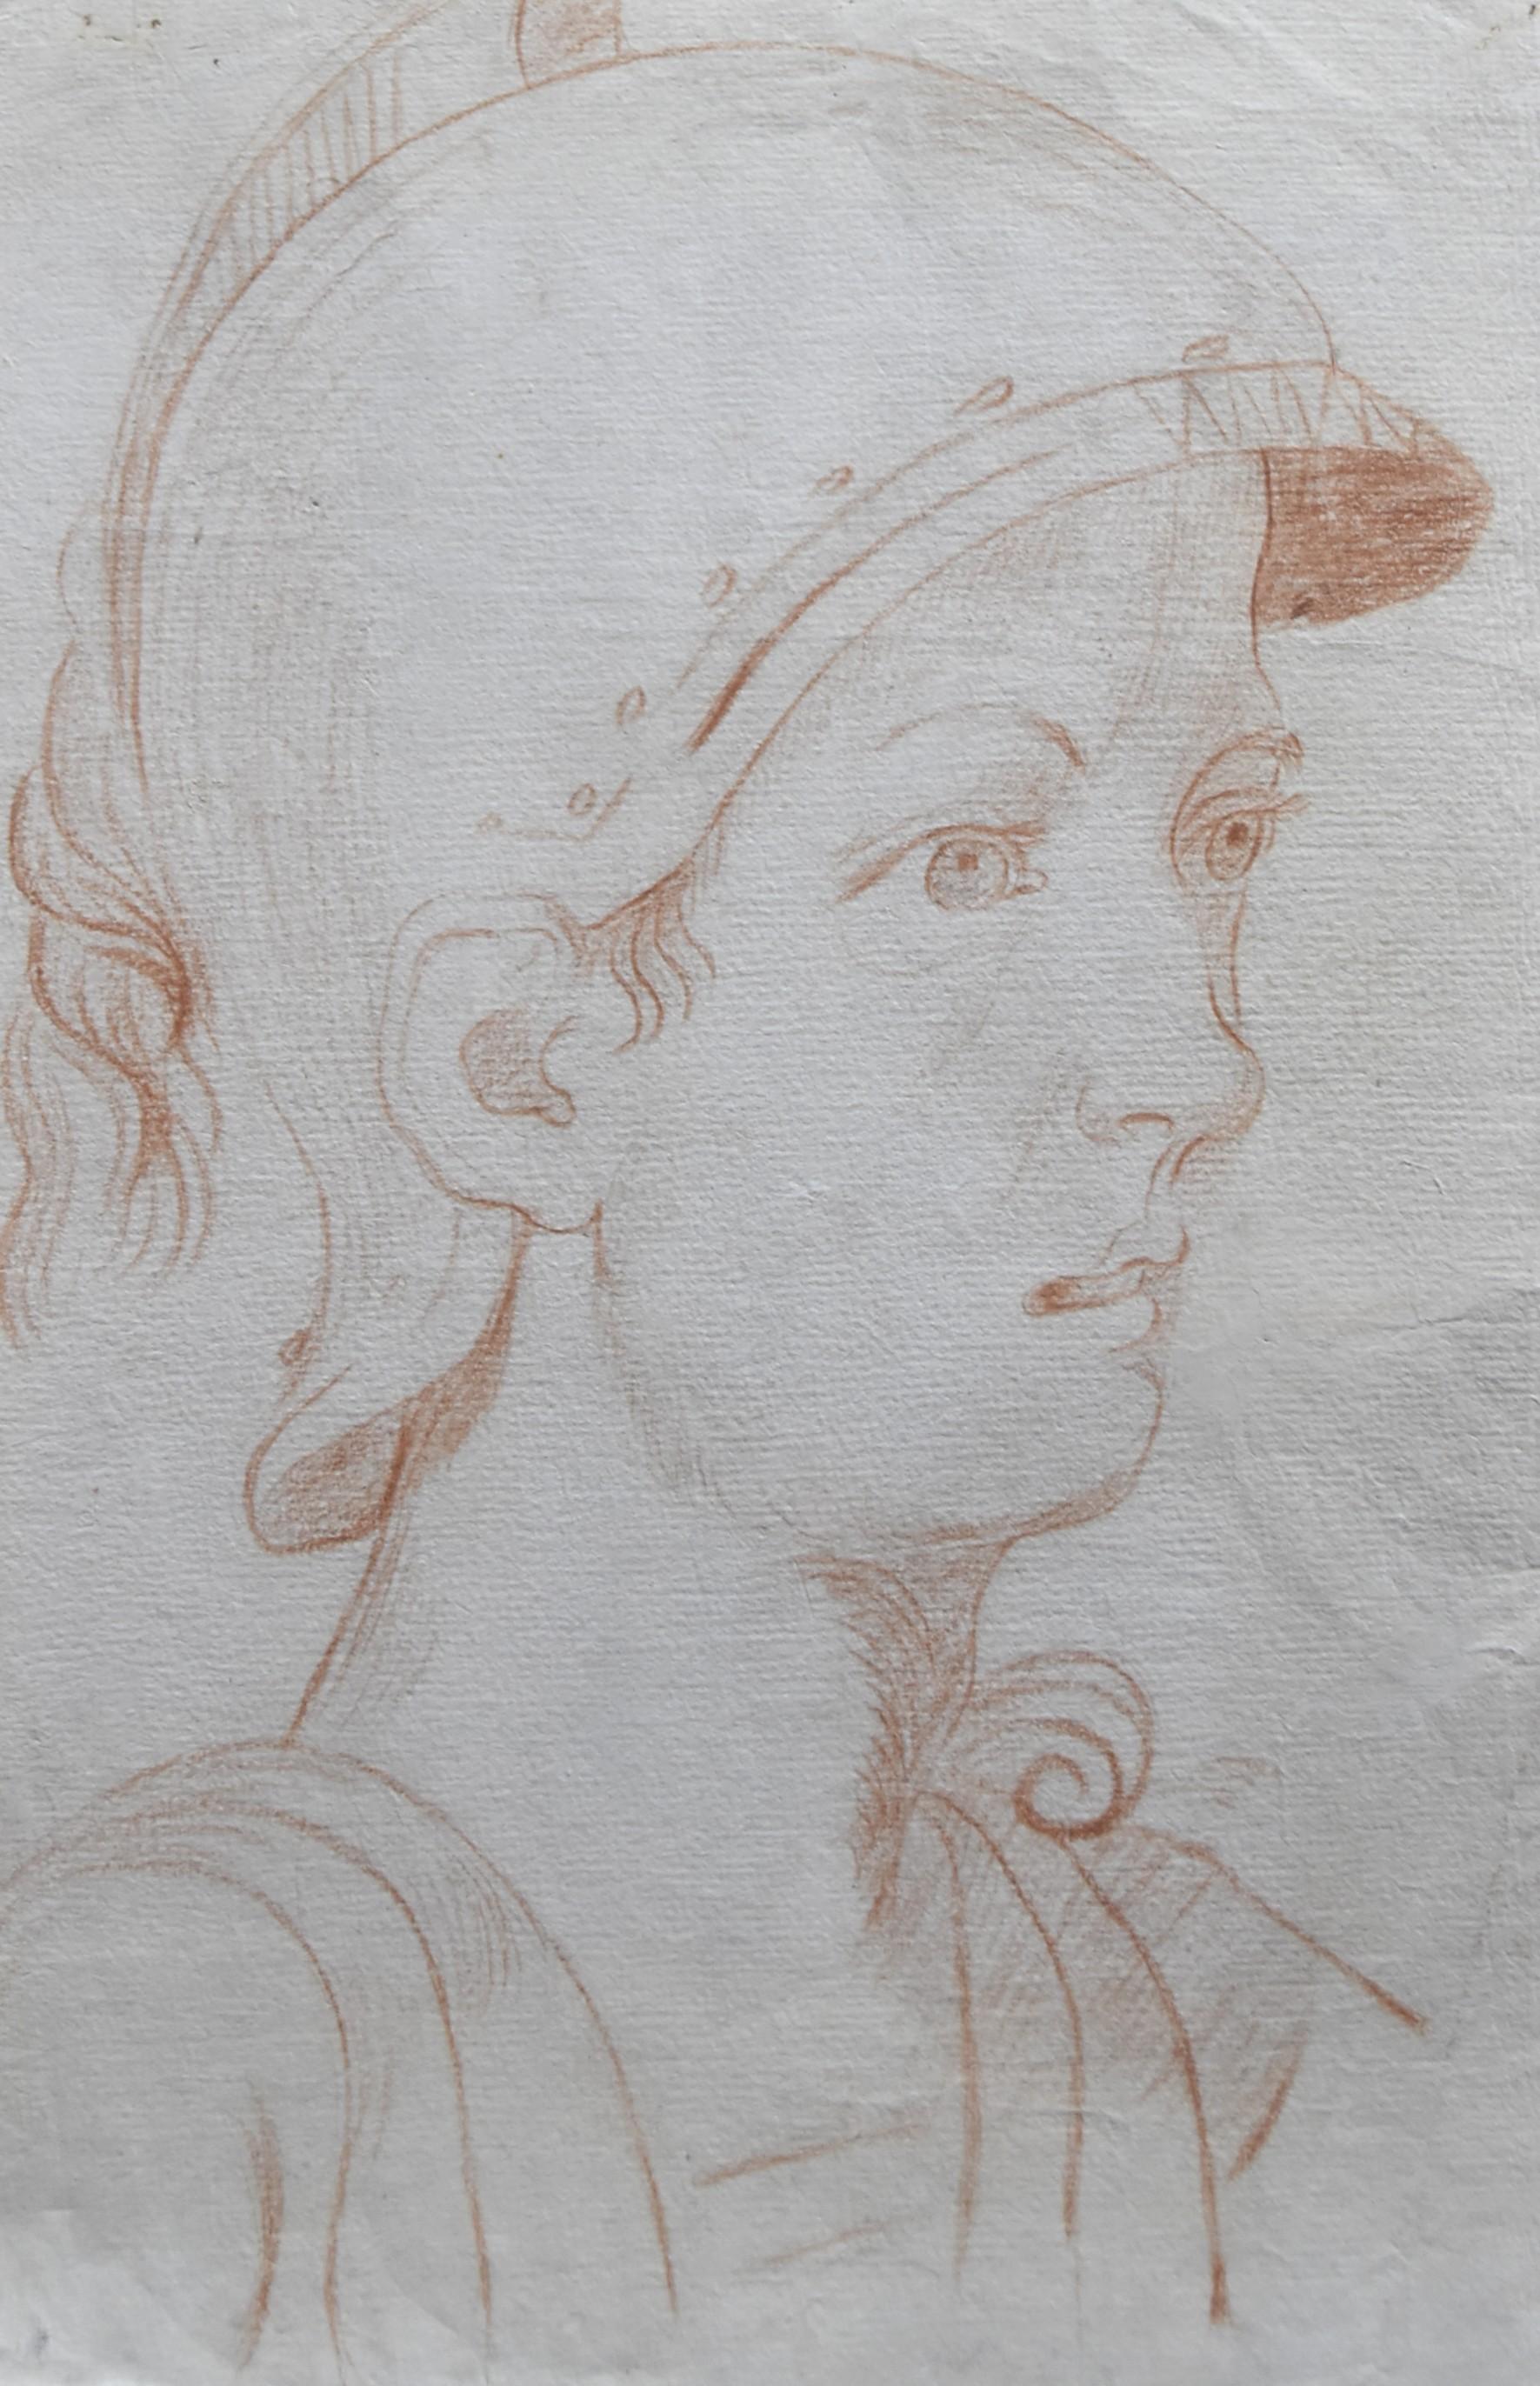 Unknown Figurative Art - Italian School 18th century,  An Ancient soldier in profile, red chalk on paper